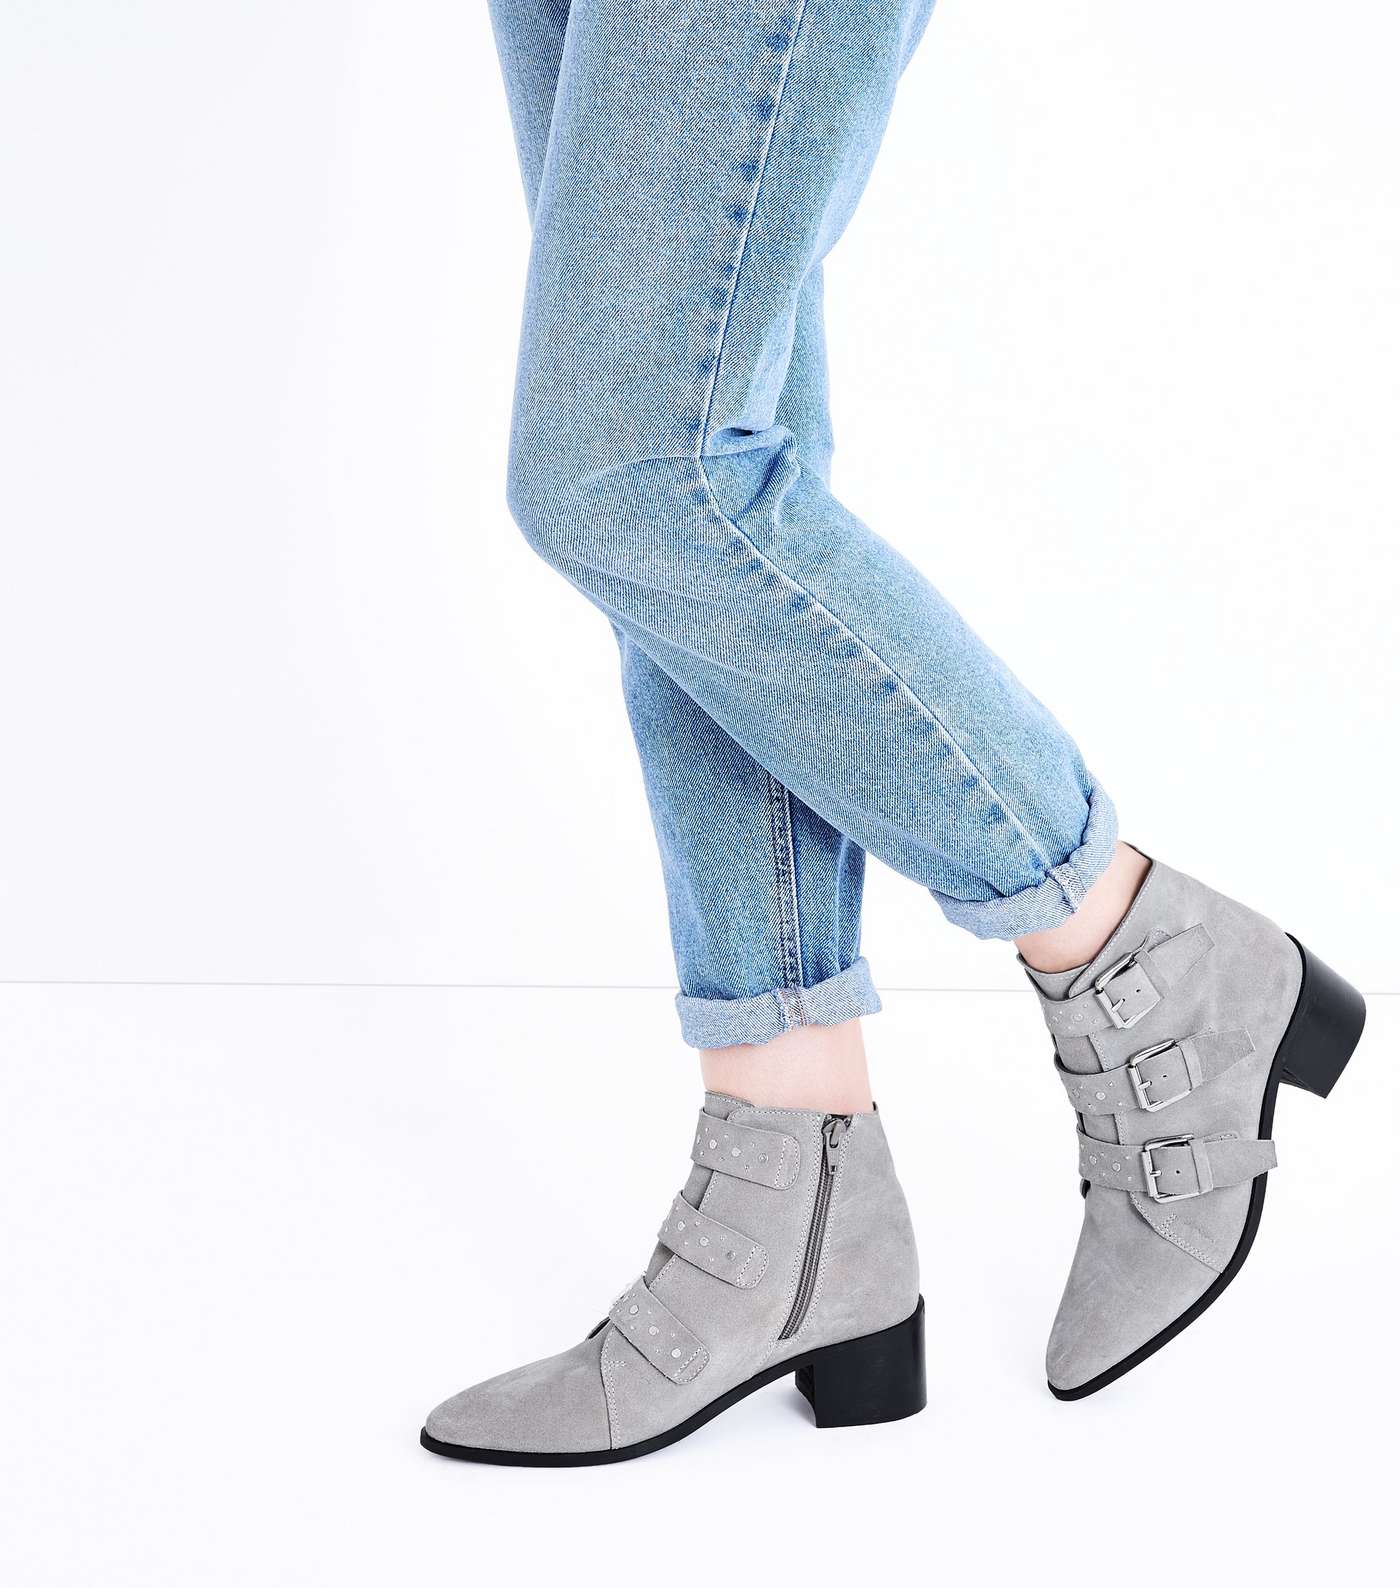 Grey Premium Suede Stud Buckle Ankle Boots Image 2